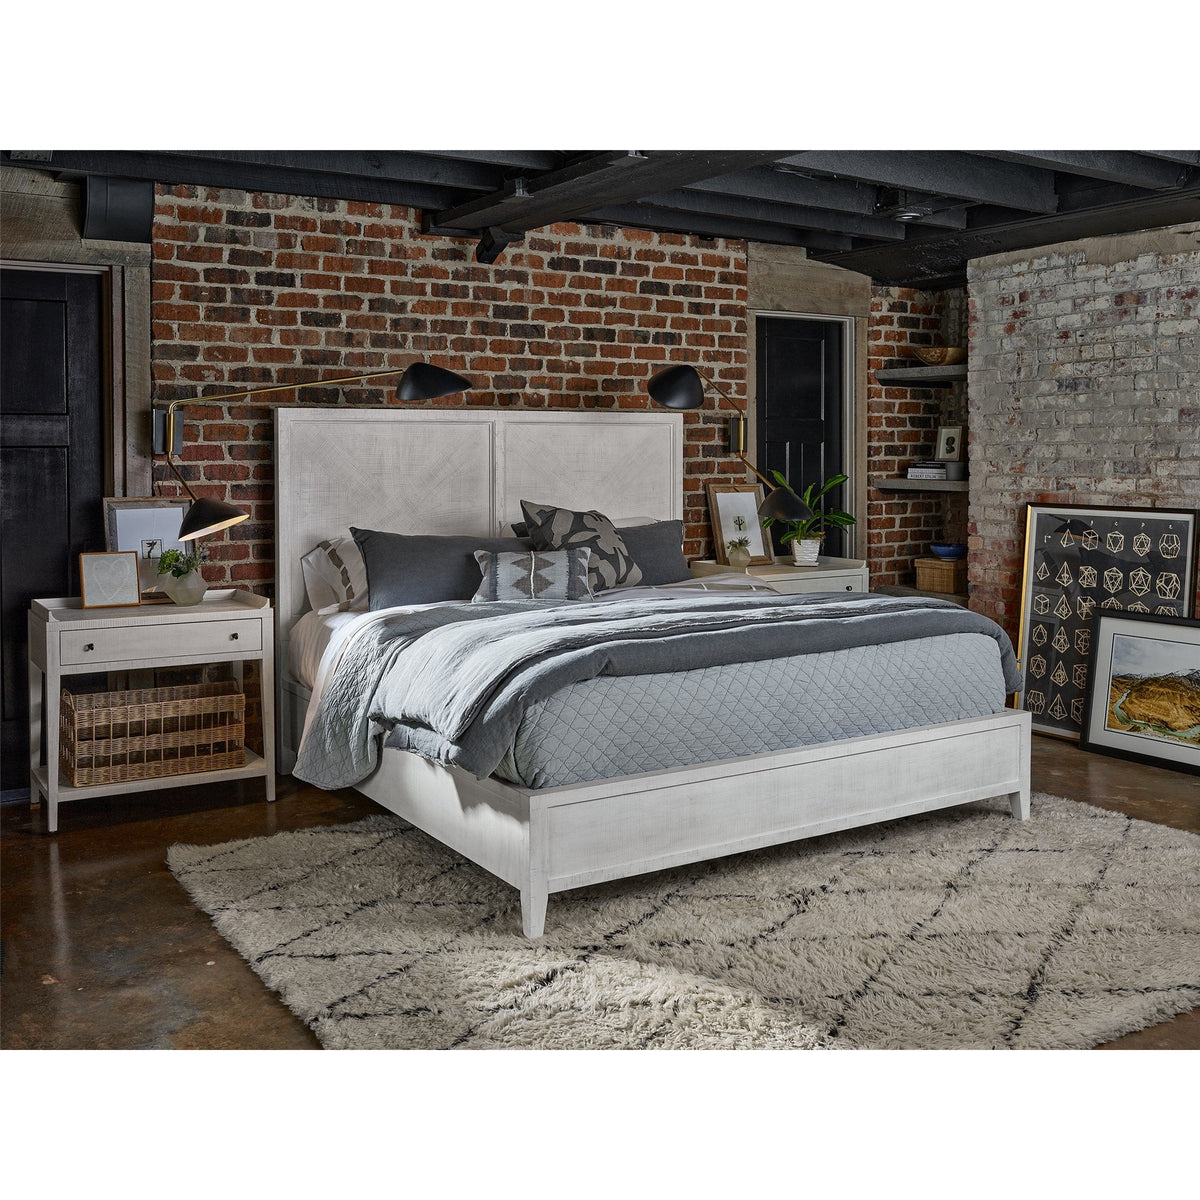 Ames Bed - Be Bold Furniture